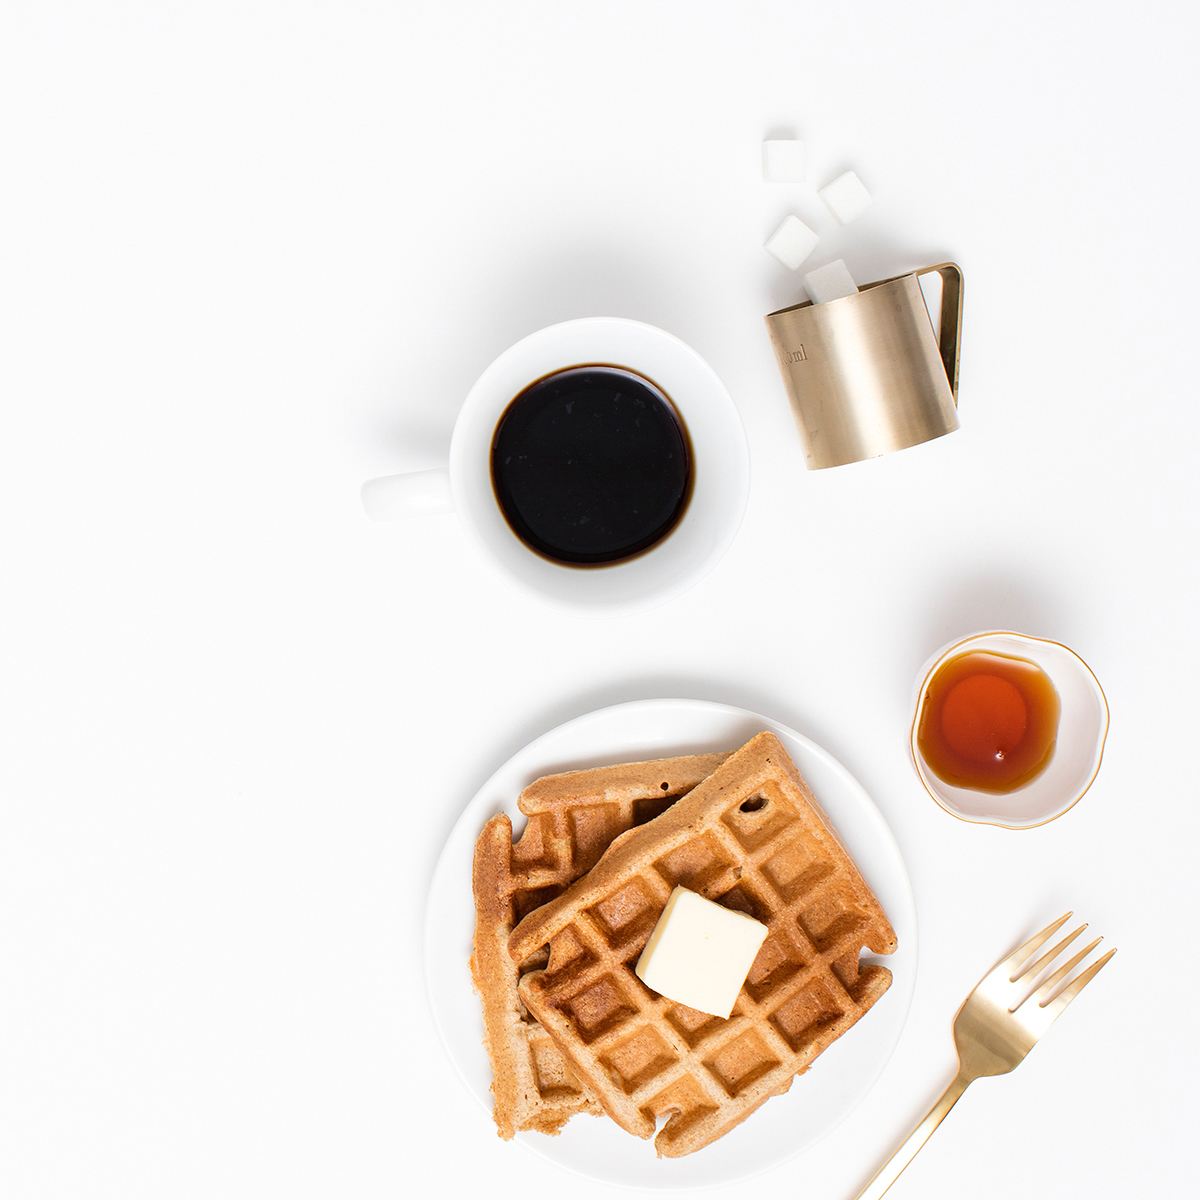 Stock Photo of Waffles, Coffee and Syrup